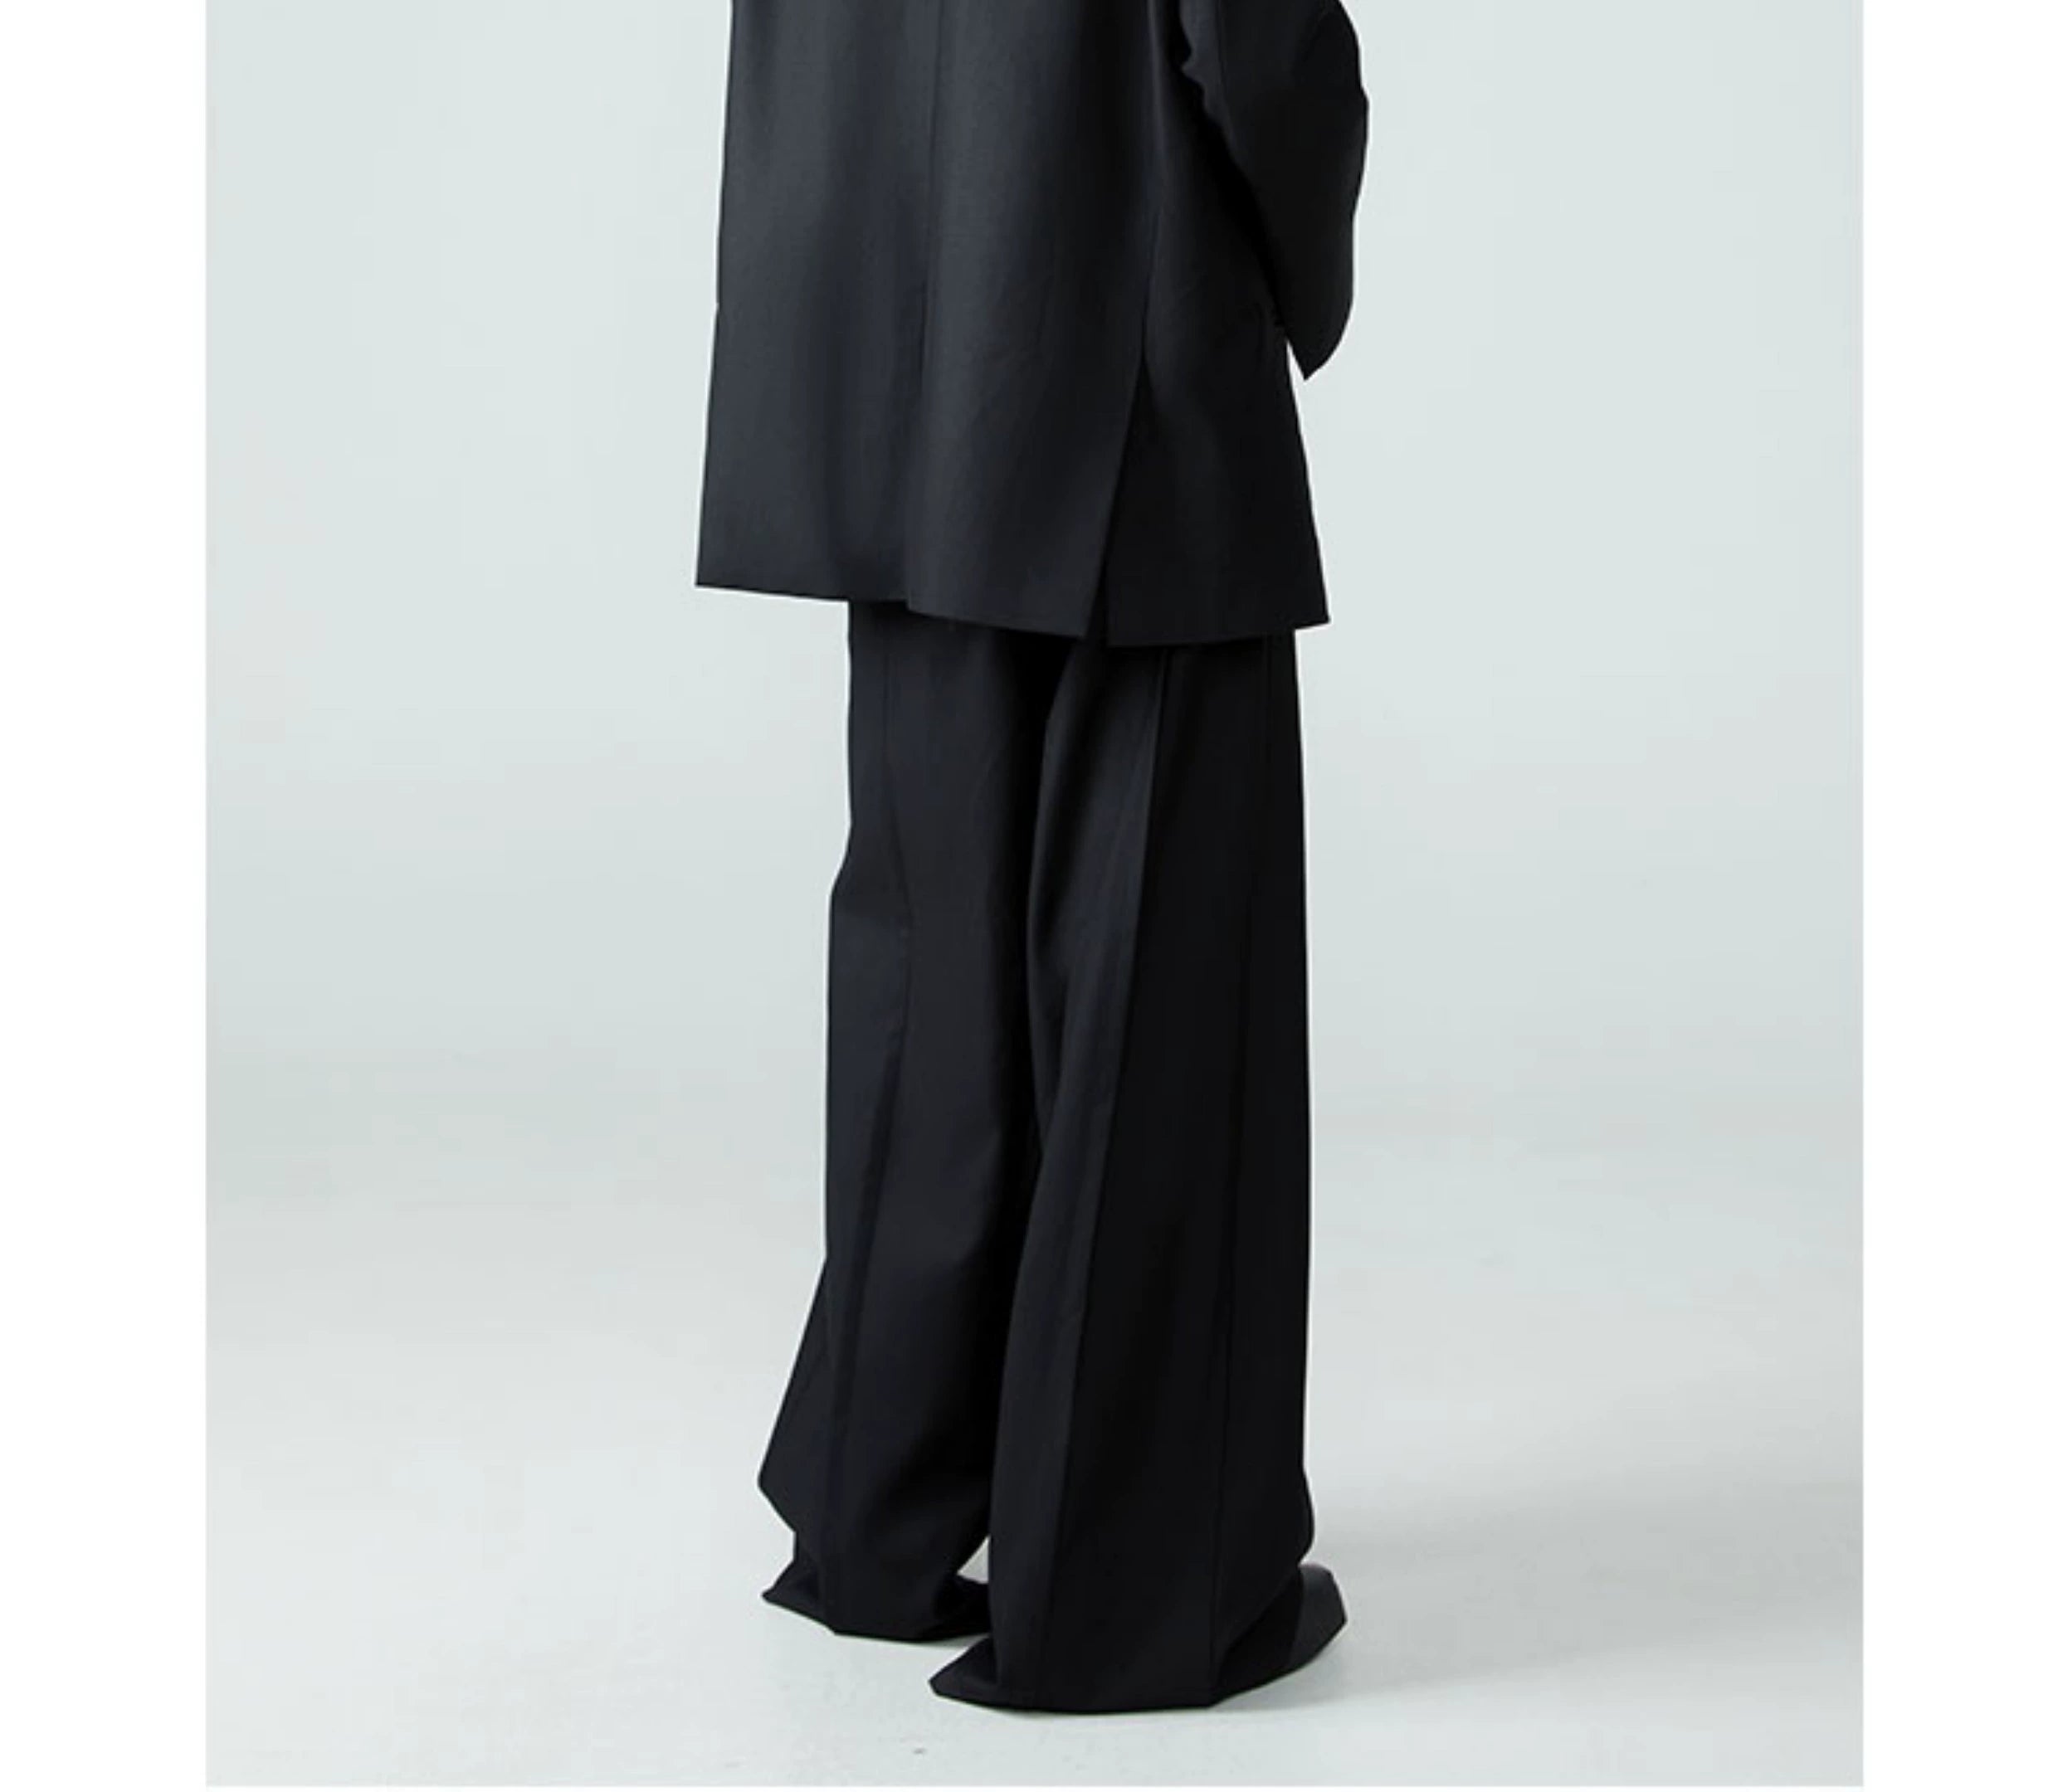 Black Structured Jacket With Padded Shoulders - chiclara